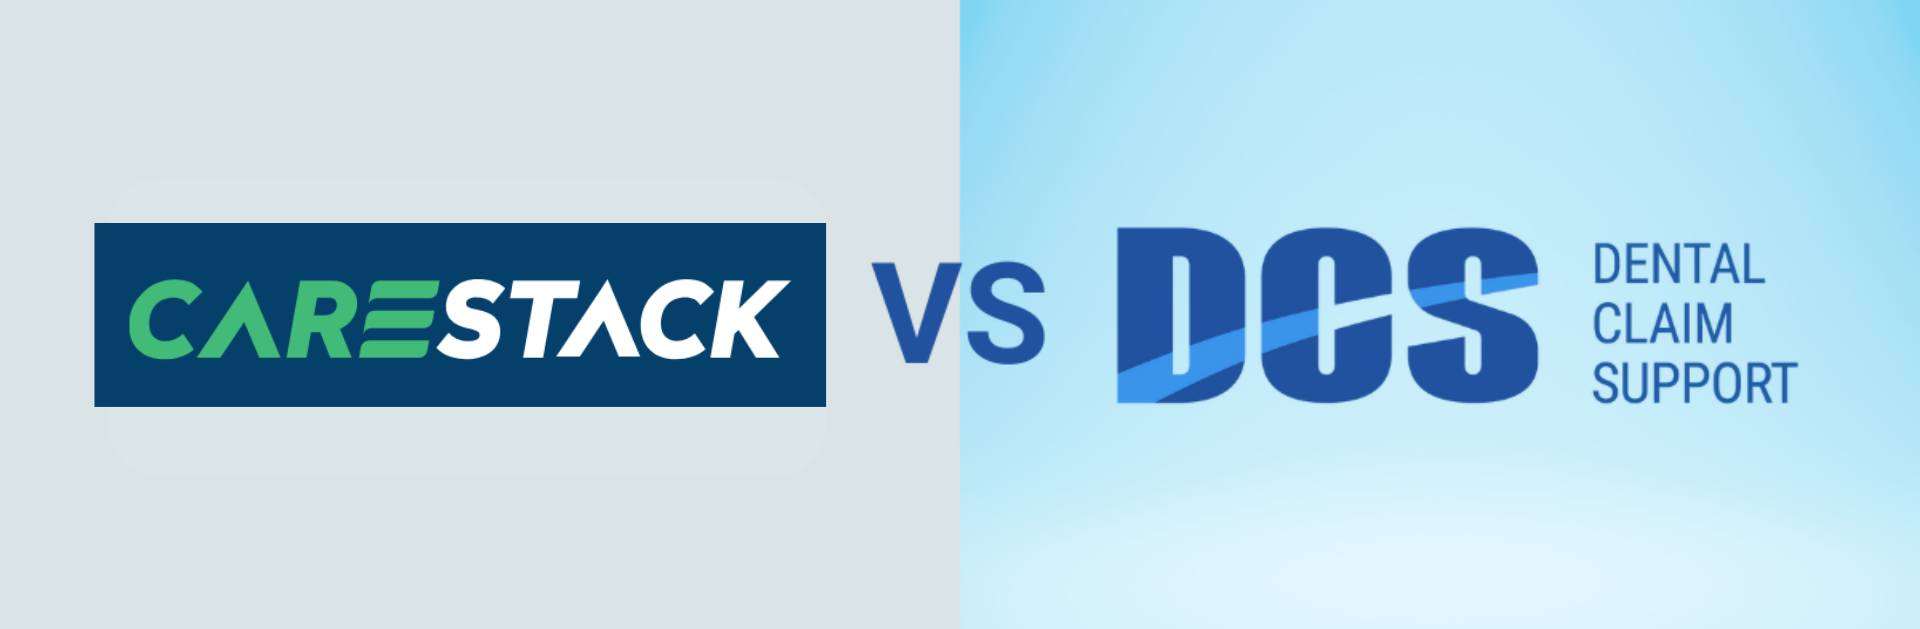 DCS vs CareStack: Let's compare two top RCM companies [3 of 10]